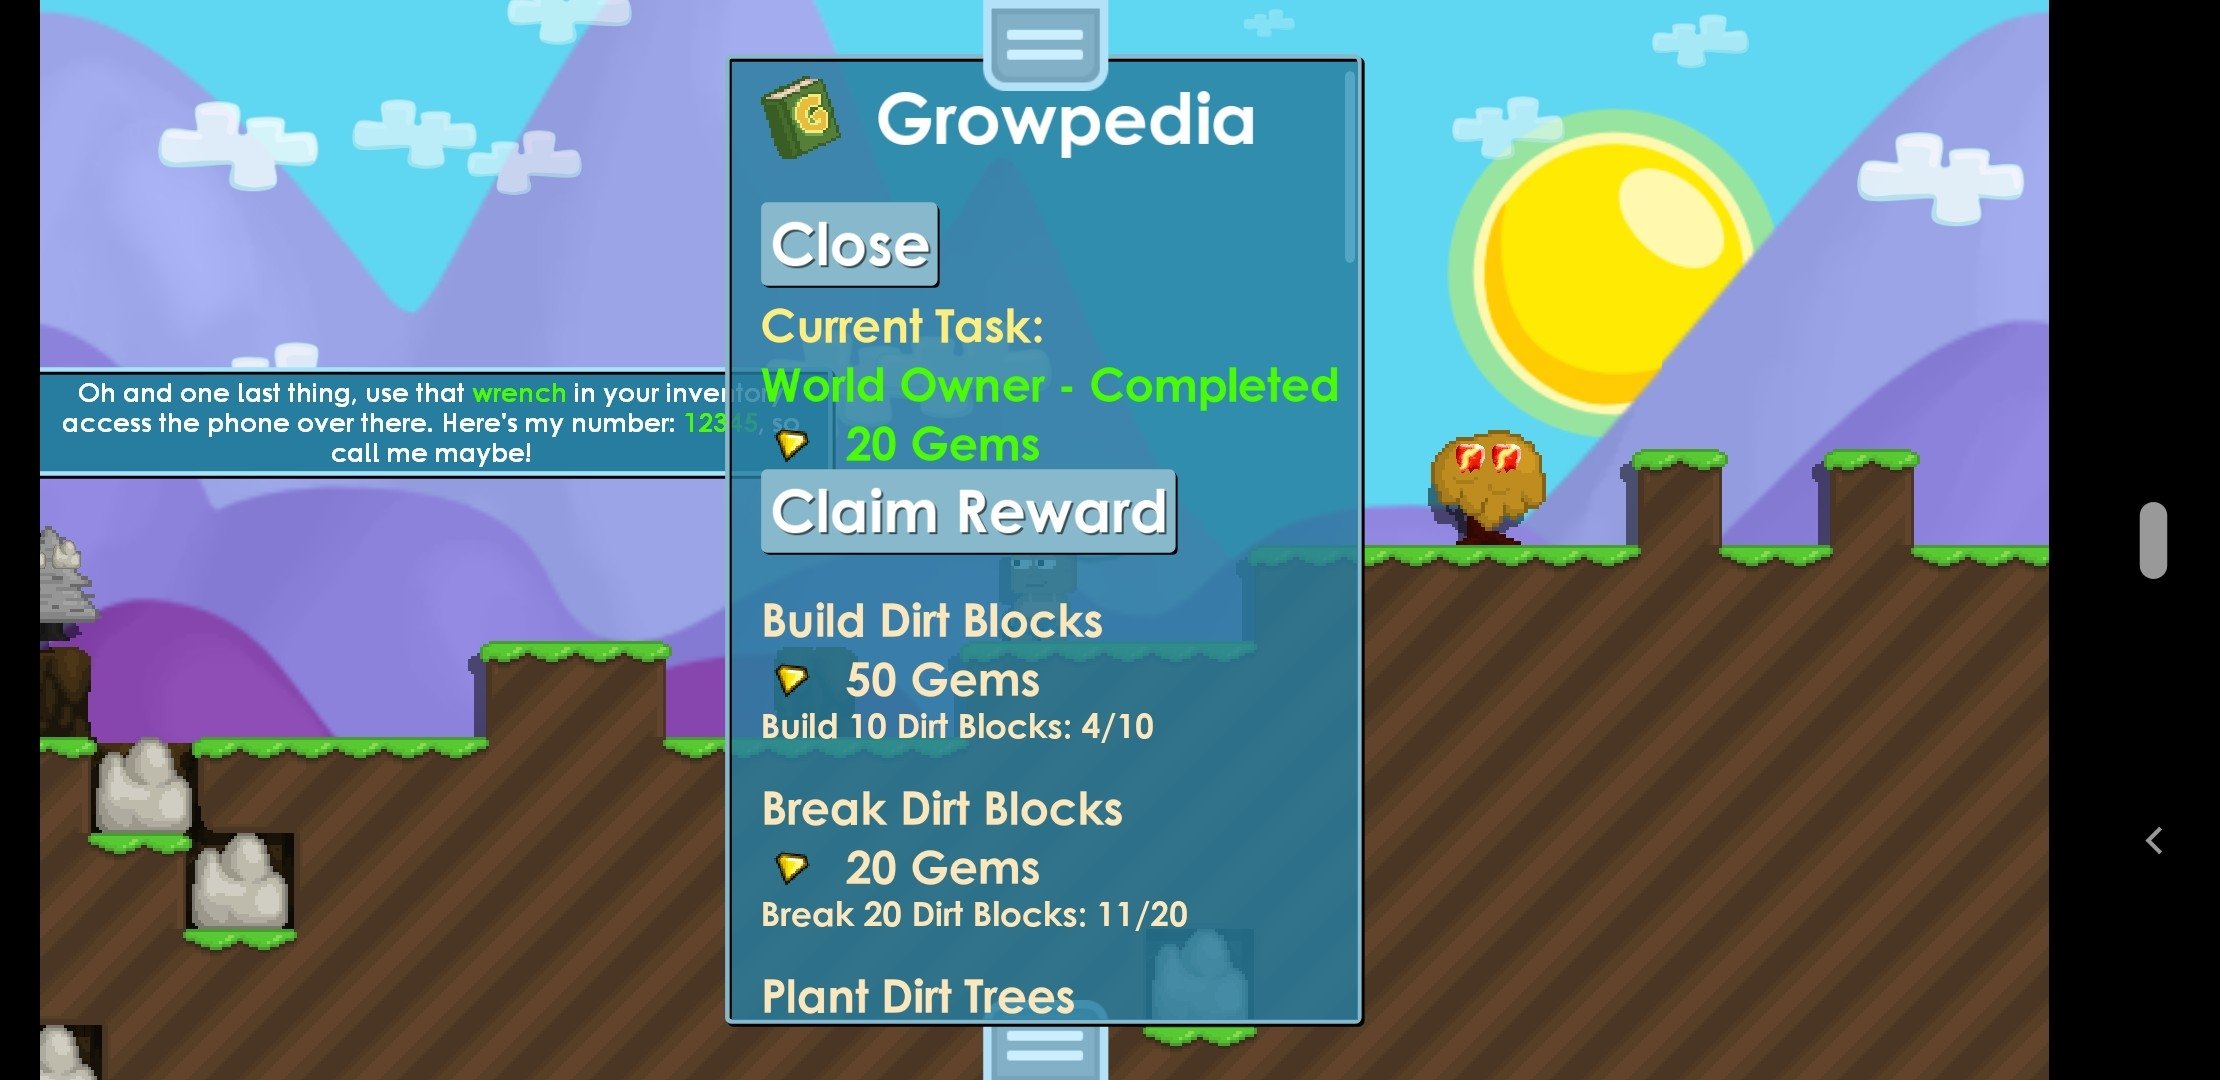 Download Growtopia APKs for Android - APKMirror